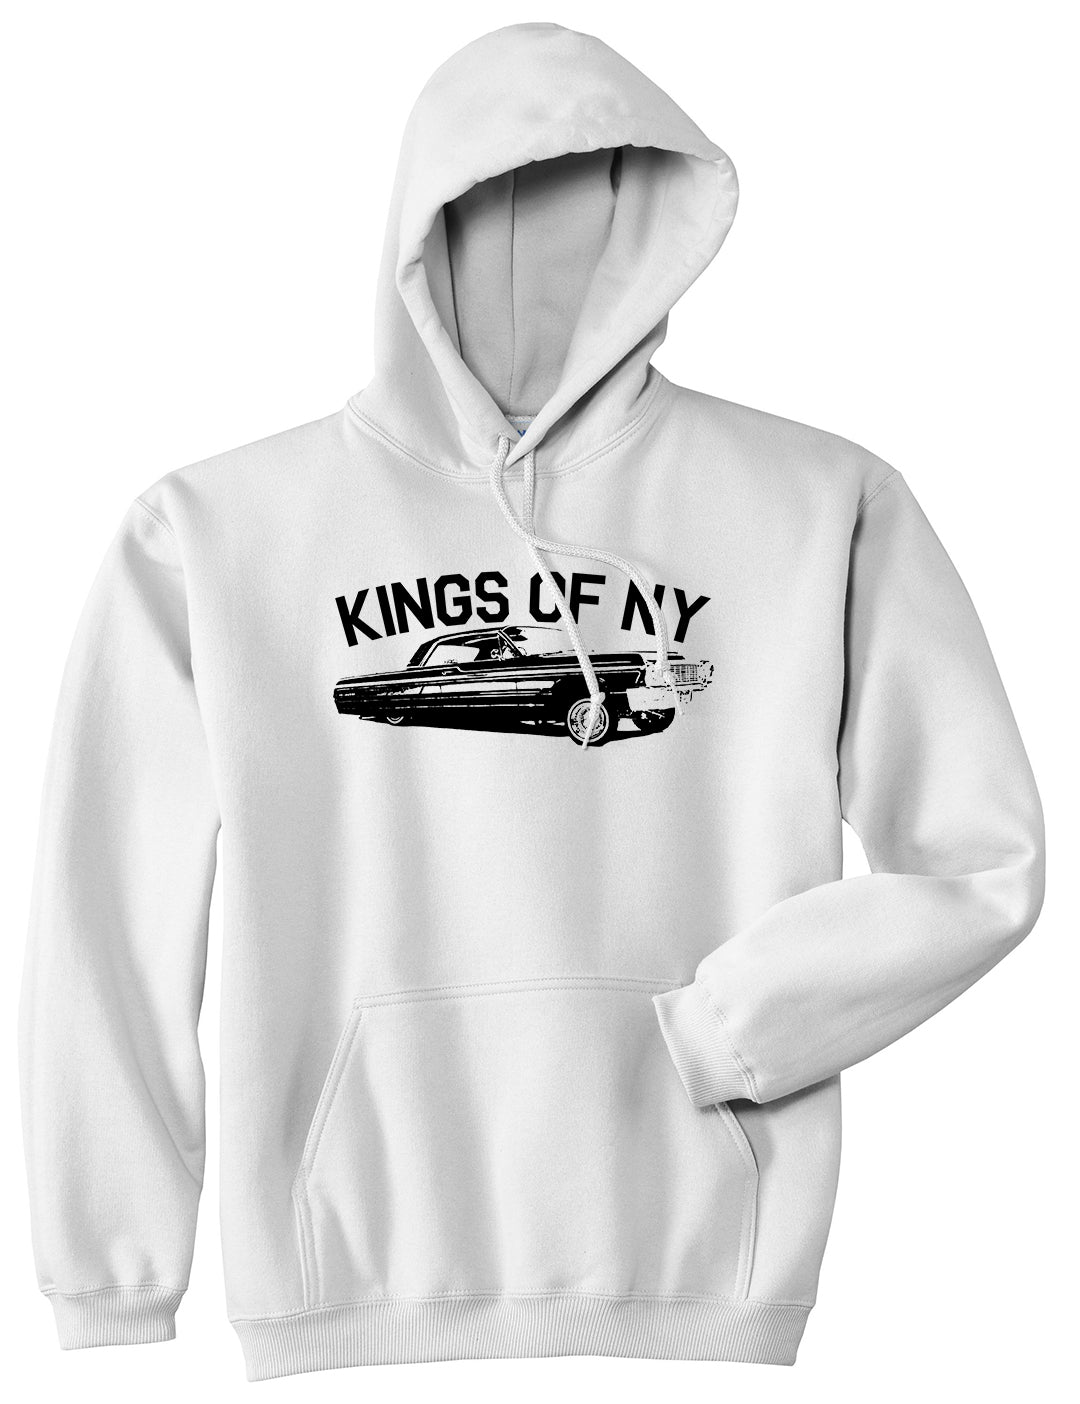 Kings Of NY Lowrider Mens Pullover Hoodie White by Kings Of NY